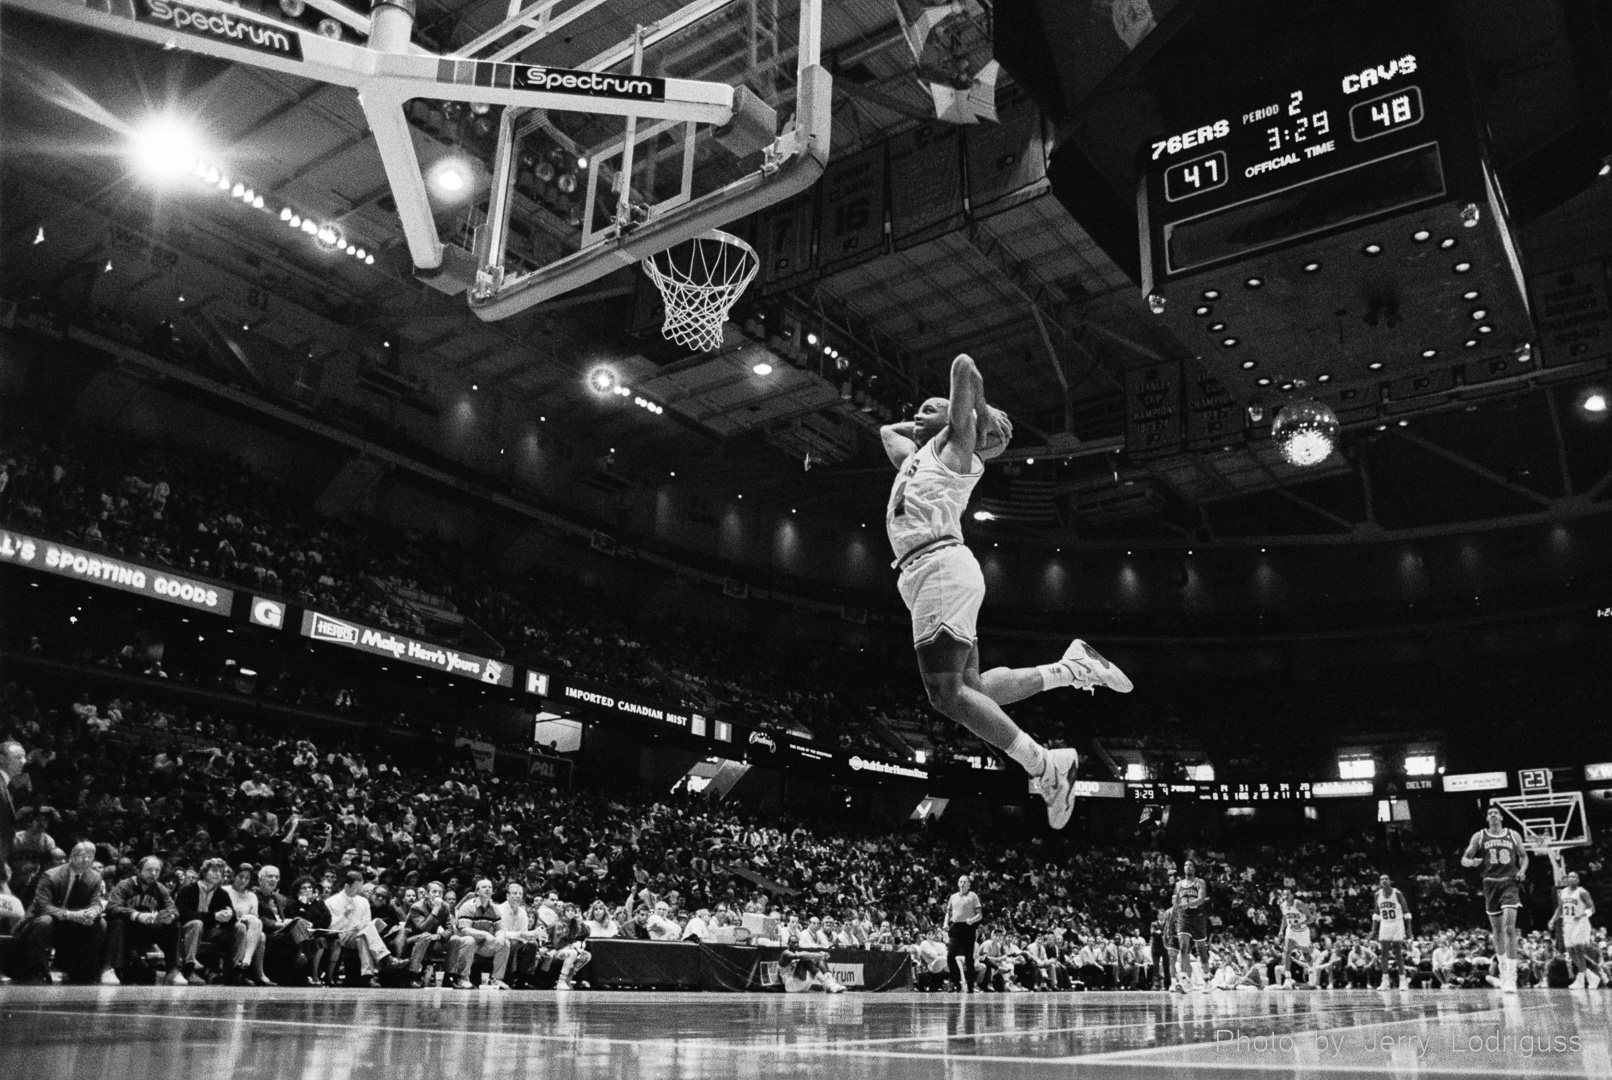 The Philadelphia 76ers' Charles Barkley throws down a thunderous two-handed tomahawk dunk after a breakaway steal against the Cleveland Cavaliers in the Spectrum on March 31, 1991.